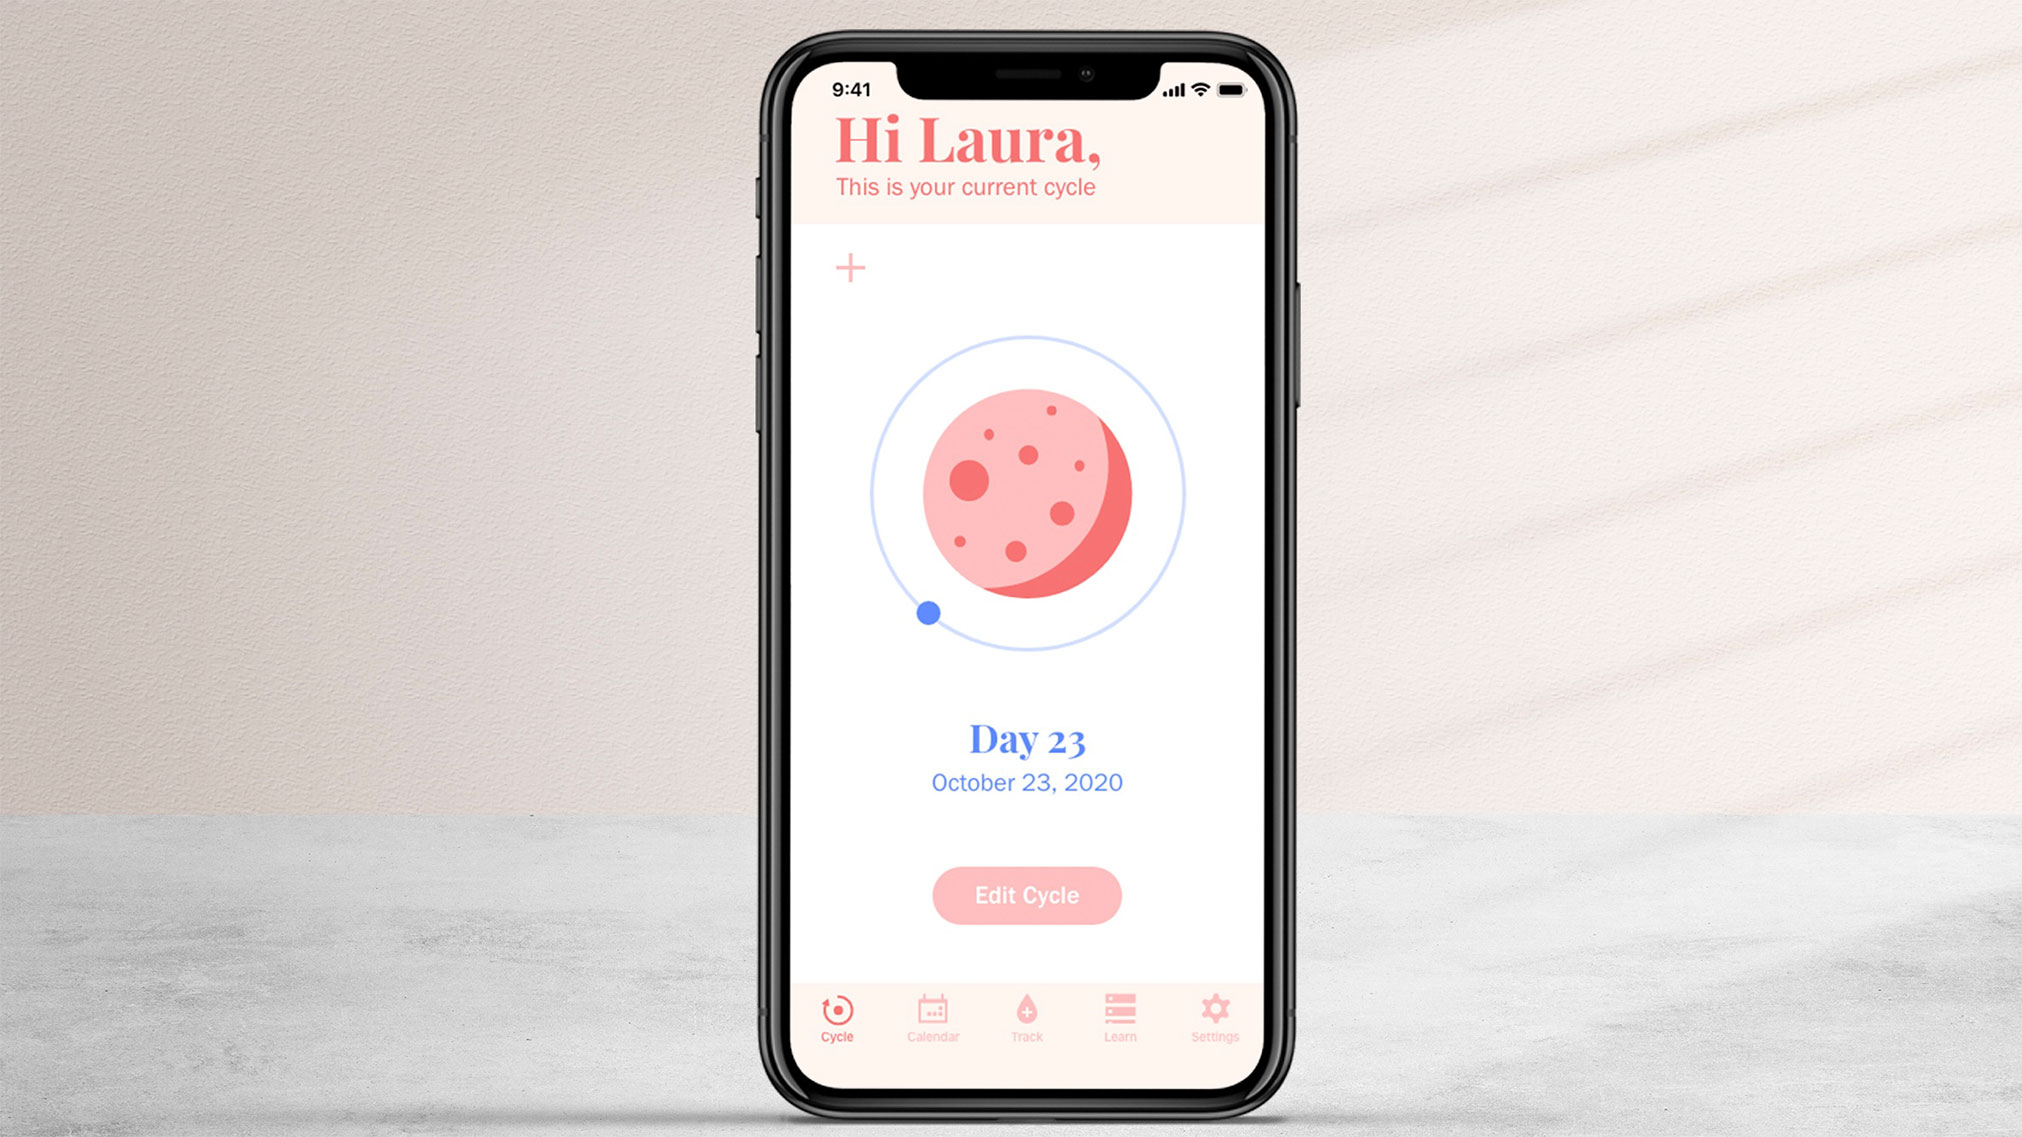 In October 2020, I decided to redesign an old college assignment called the Luna App Prototype. Luna is a period and ovulation tracker app for anyone with a menstrual cycle. This project involved logo design, UI design and an app prototype.
